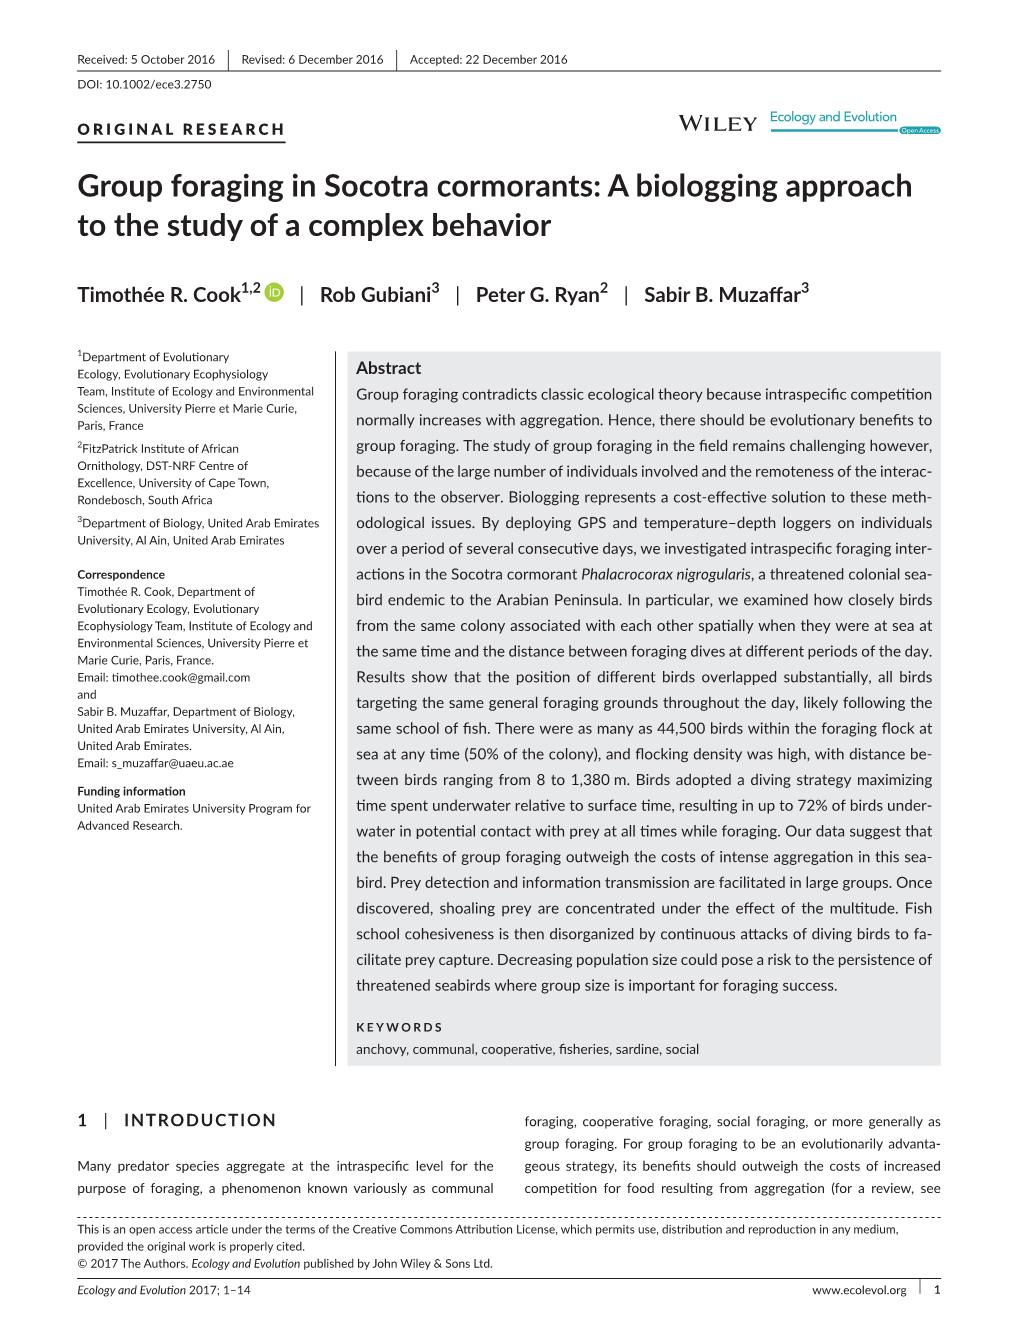 Group Foraging in Socotra Cormorants: a Biologging Approach to the Study of a Complex Behavior